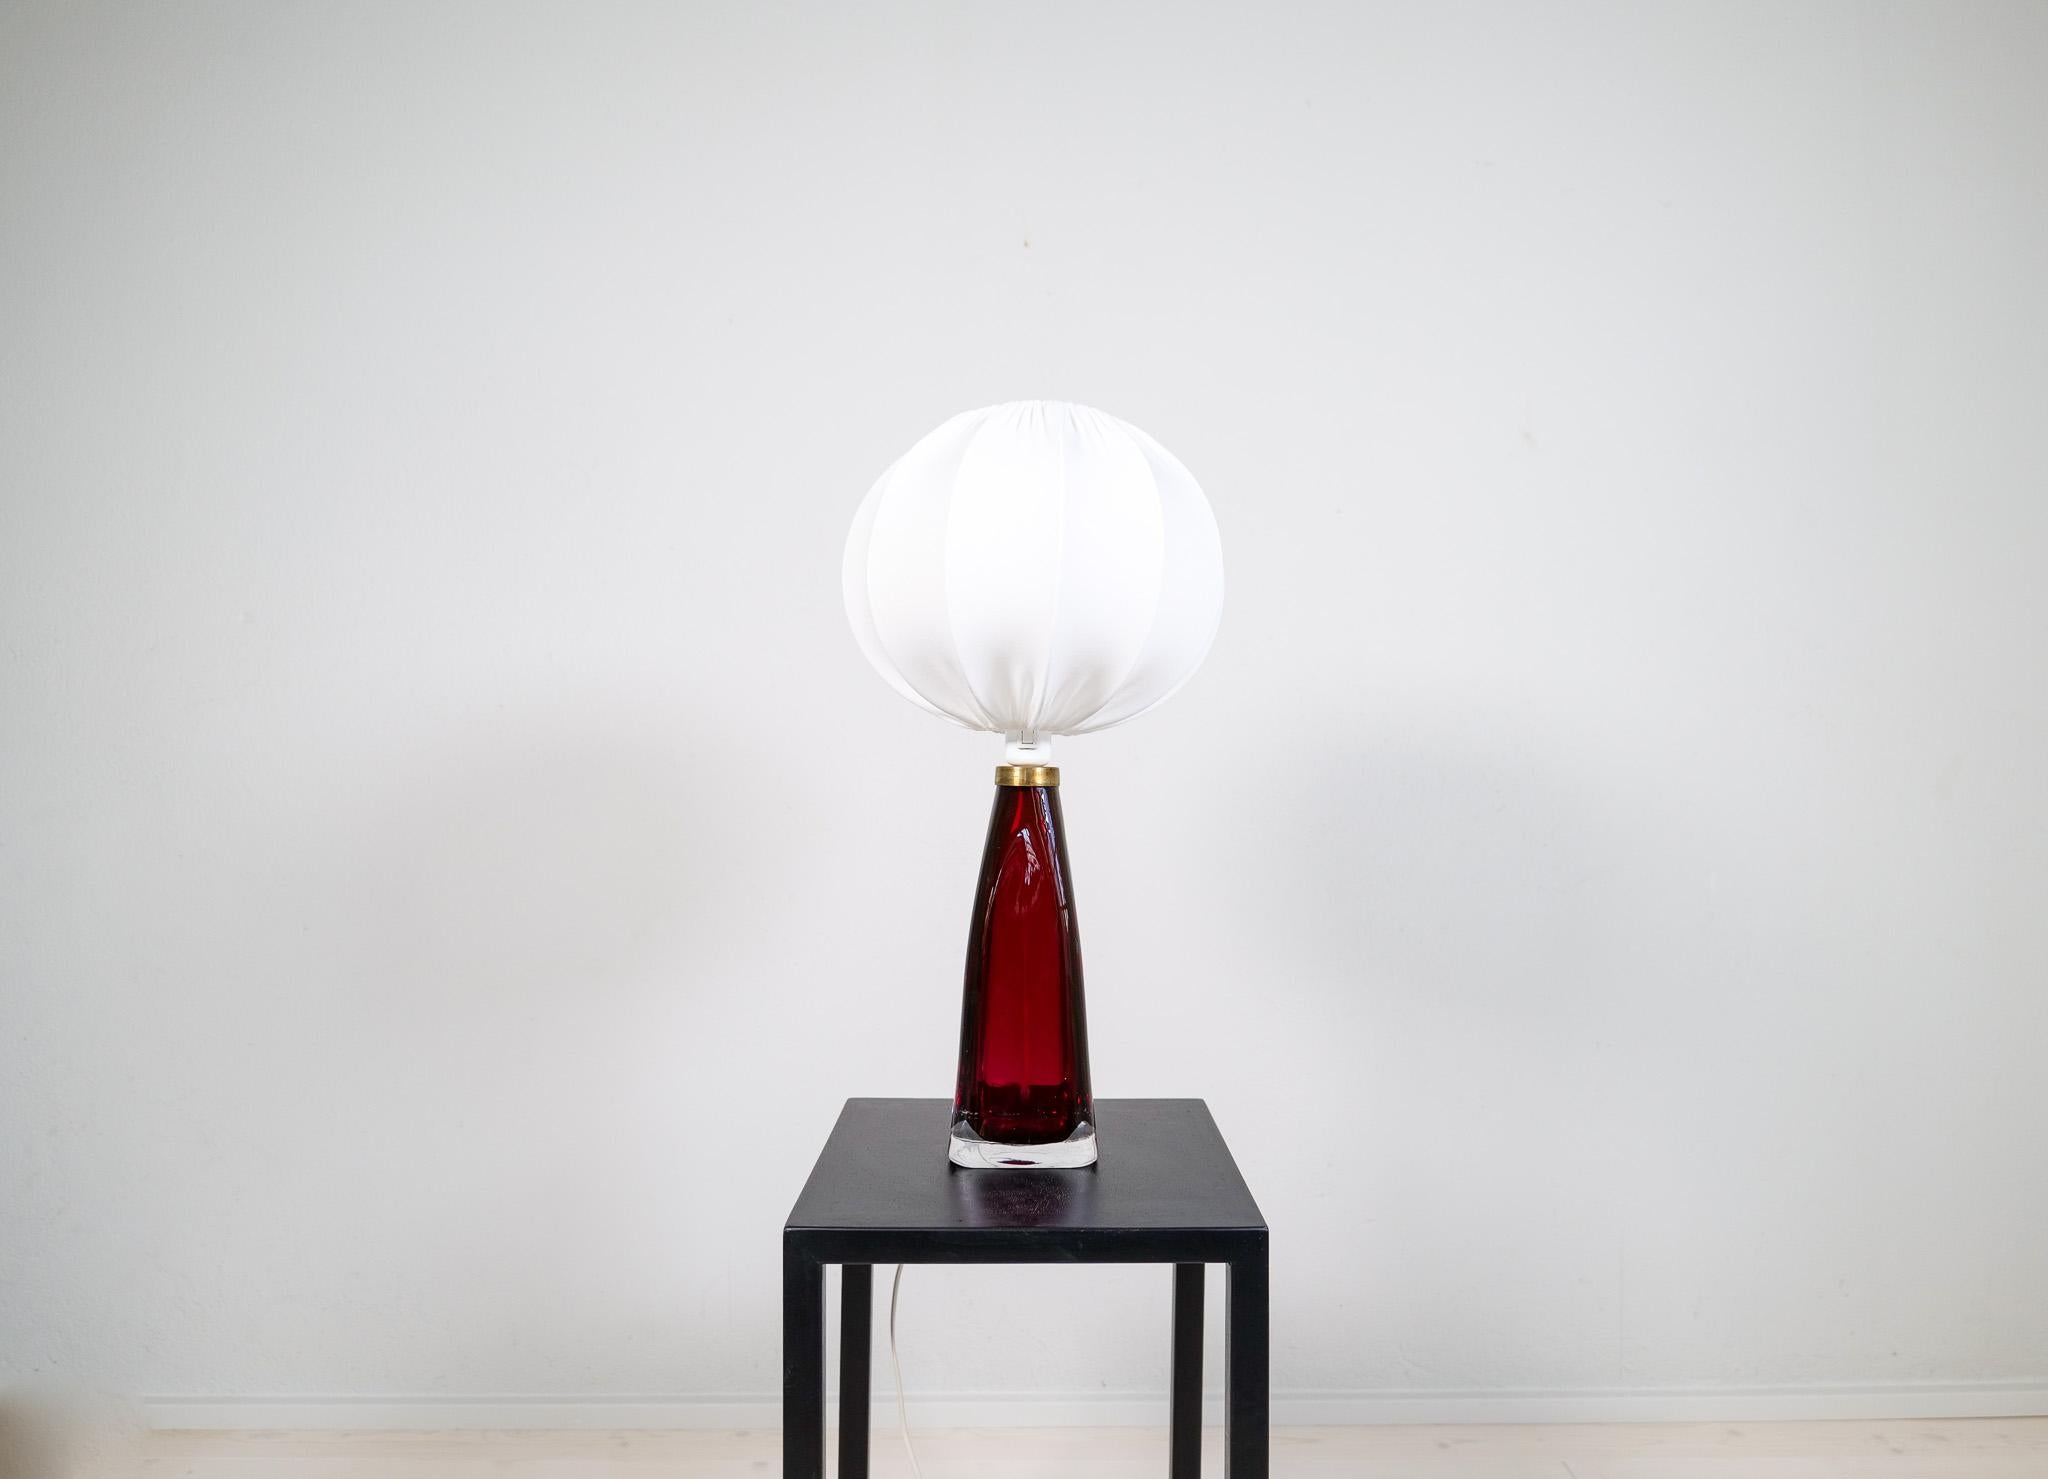 Table lamp in crystal, model RD1323 by Carl Fagerlund for Orrefors, Sweden.
The lamps have a stunning red color with brass details. The intensity of the crystal glass and its colored glass inside makes this a great piece. This one with an all-new